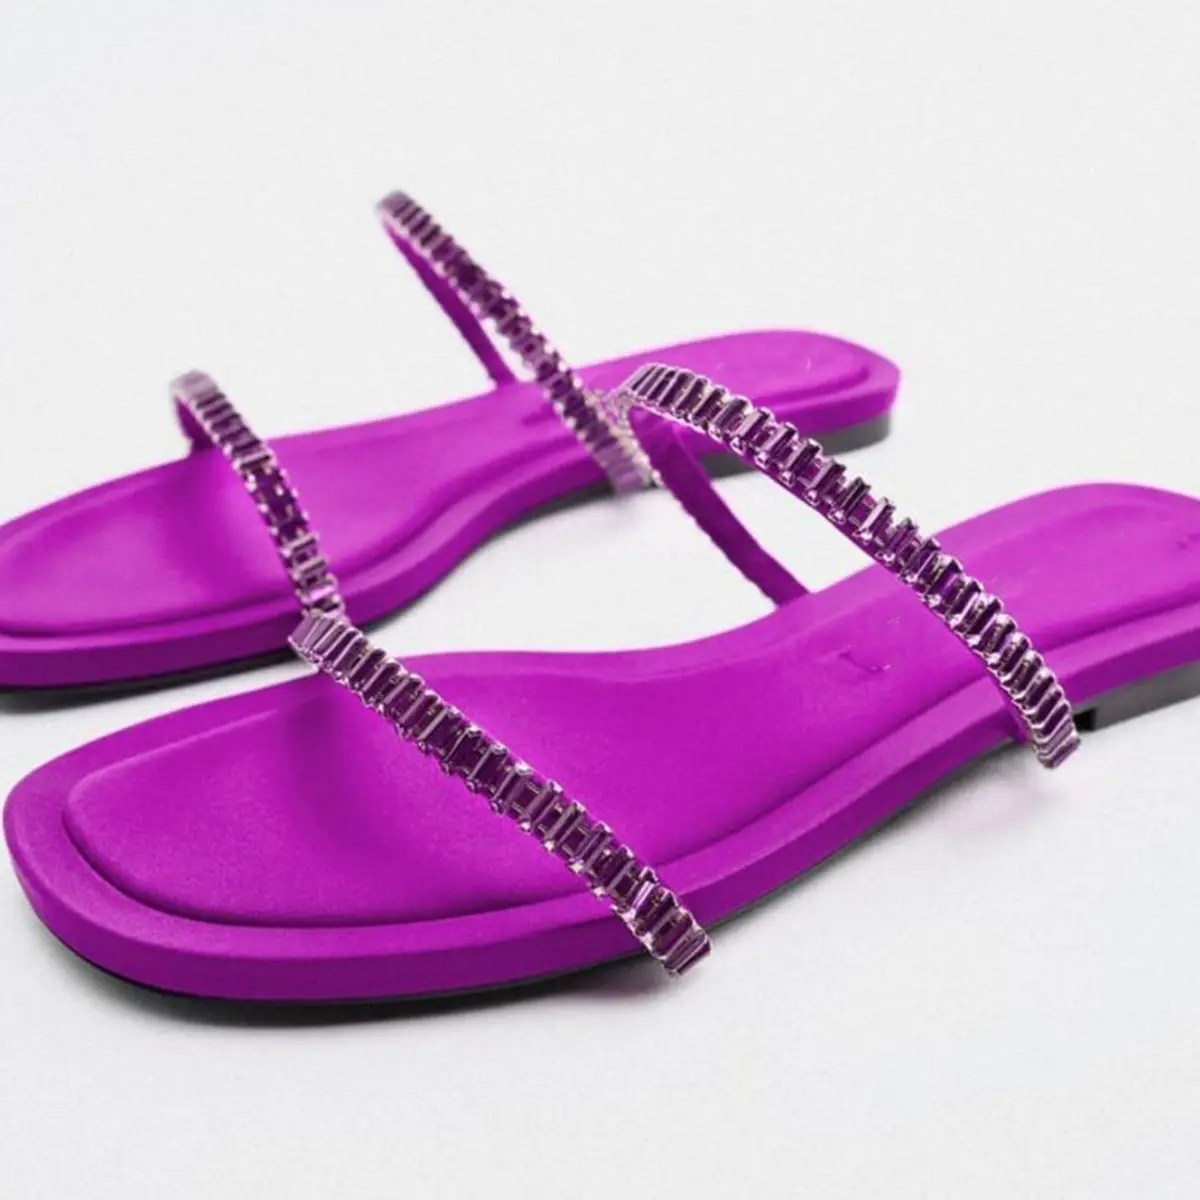 J&H 2022 summer fashion women's flats with double strap chic casual slides slippers high quality flat sandals